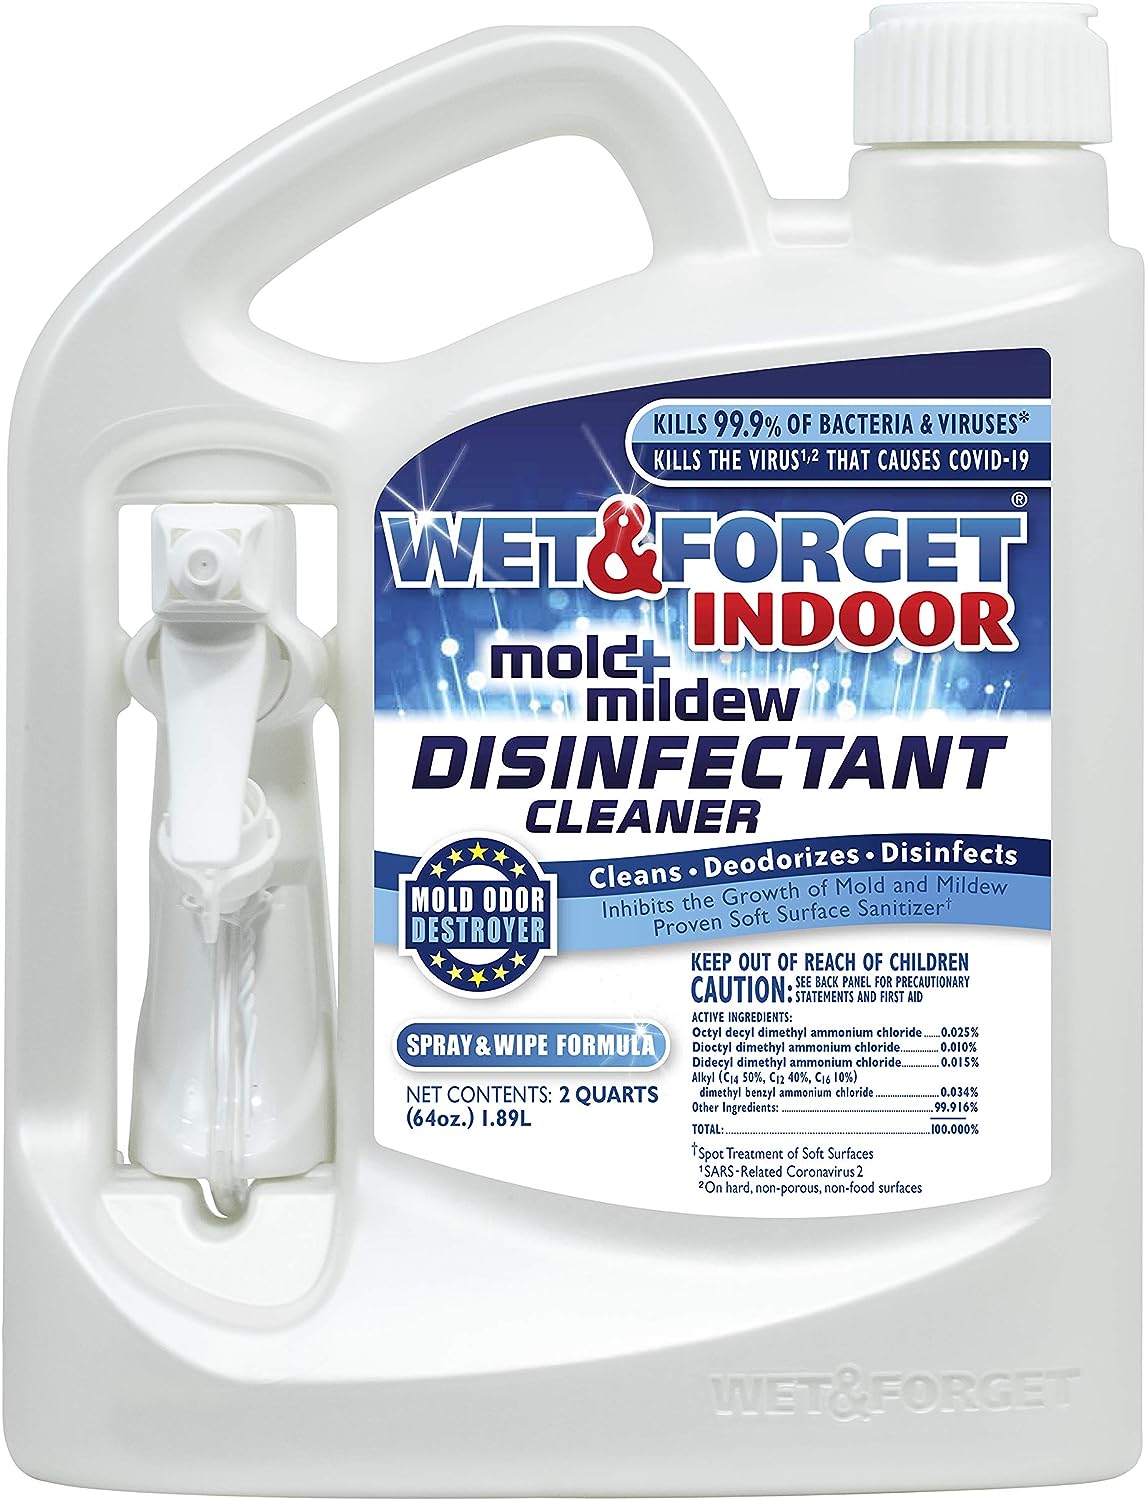 Wet & Forget Indoor Mold and Mildew All-Purpose [...]